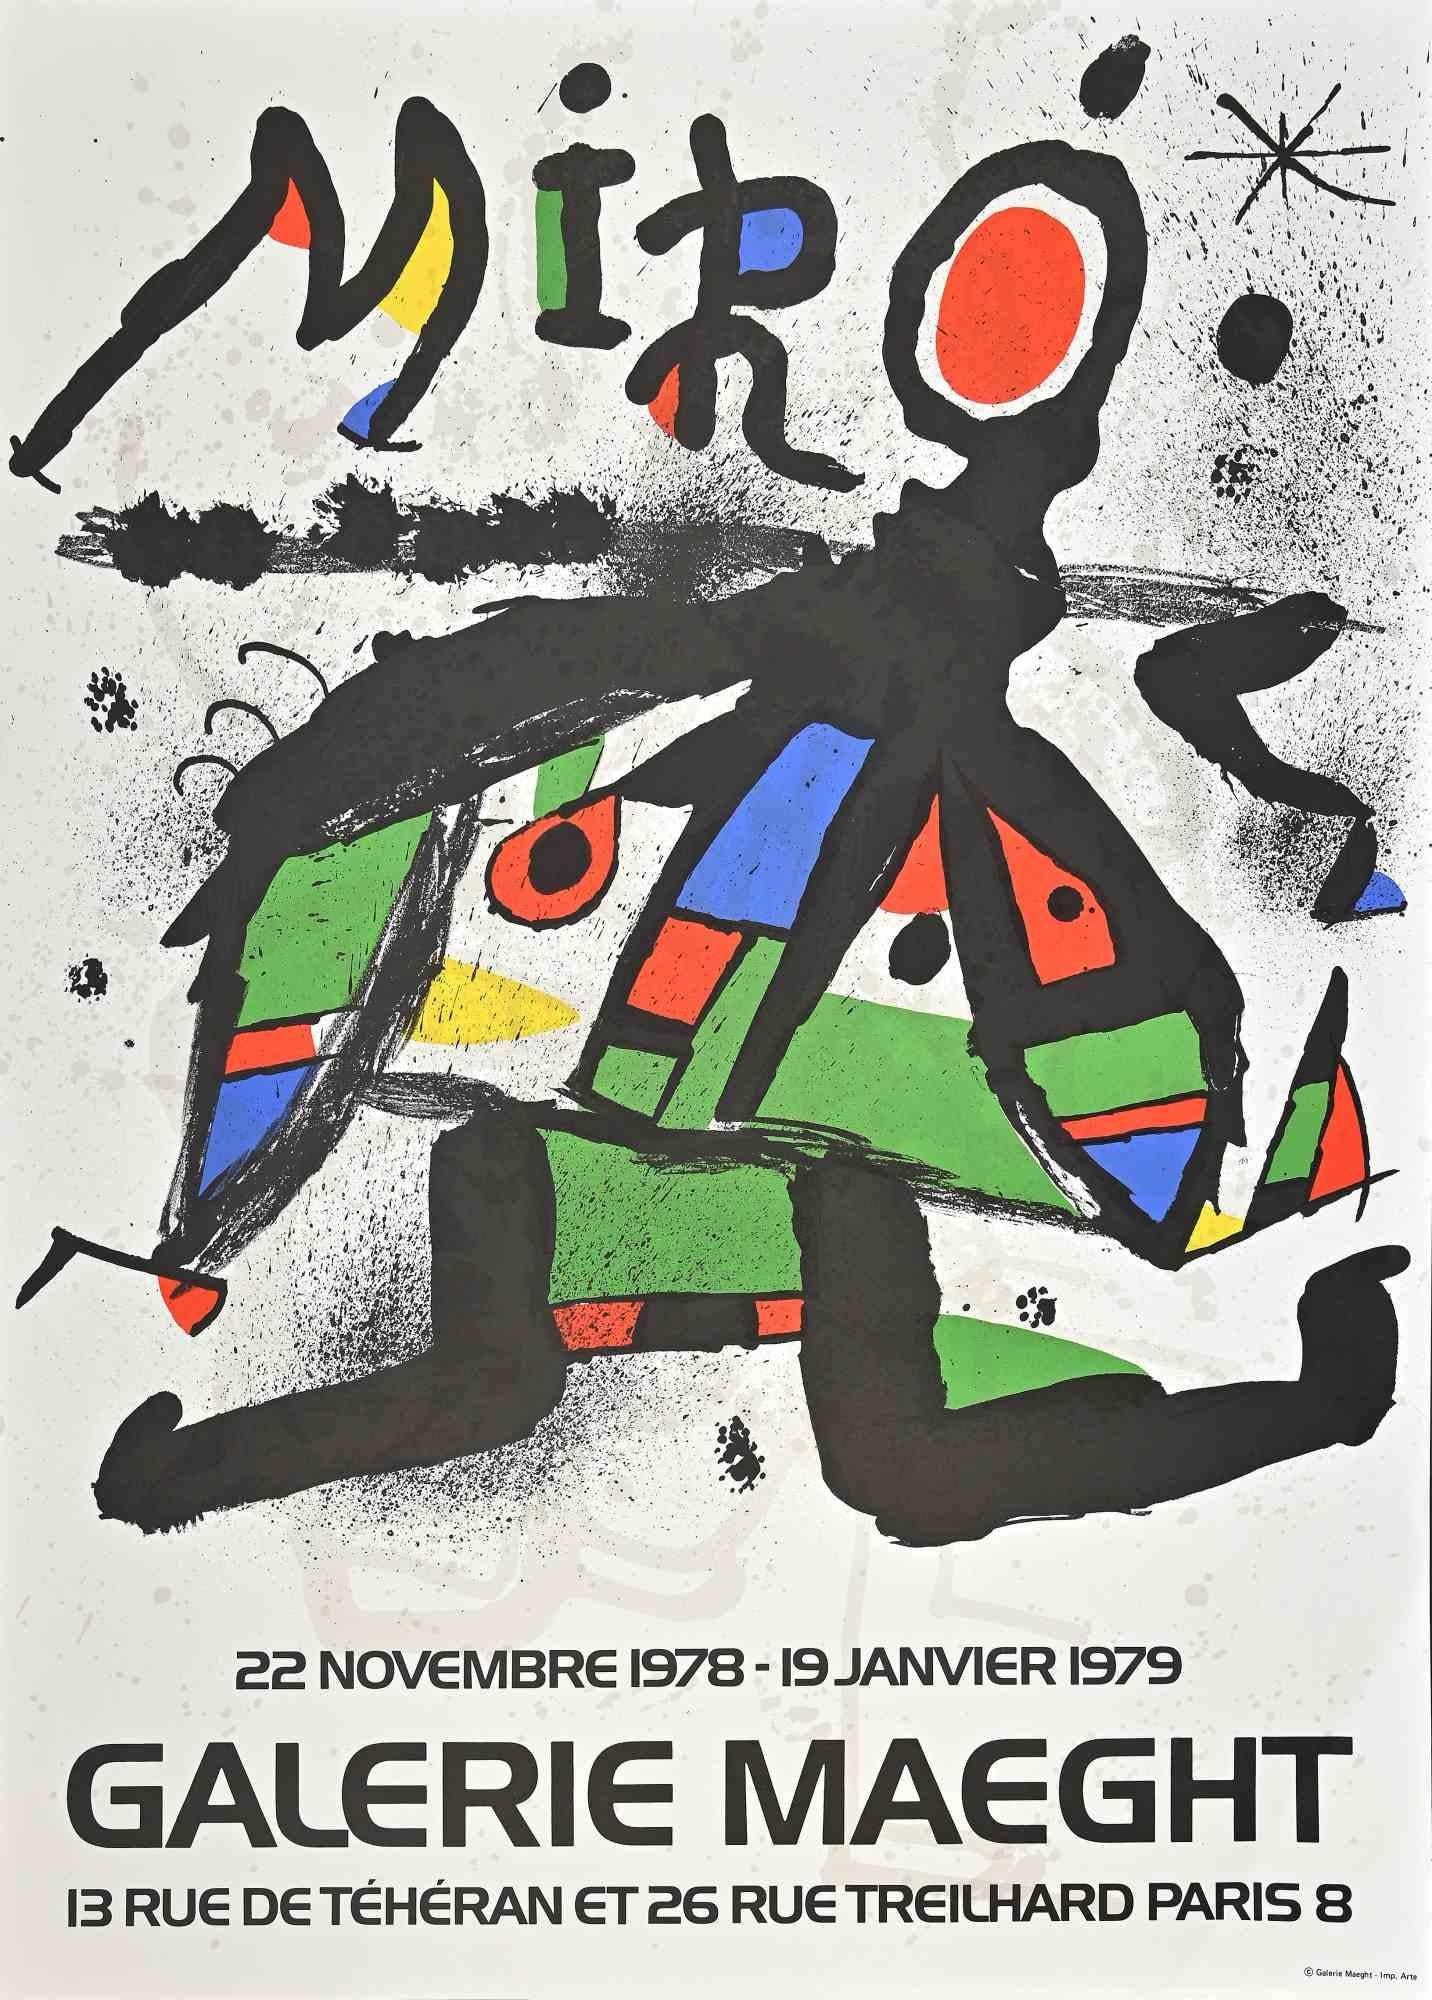 profil cement voldtage Joan Miro Poster Galerie Maeght - 30 For Sale on 1stDibs | galerie maeght  miro poster, joan miro exhibition poster, galerie maeght poster